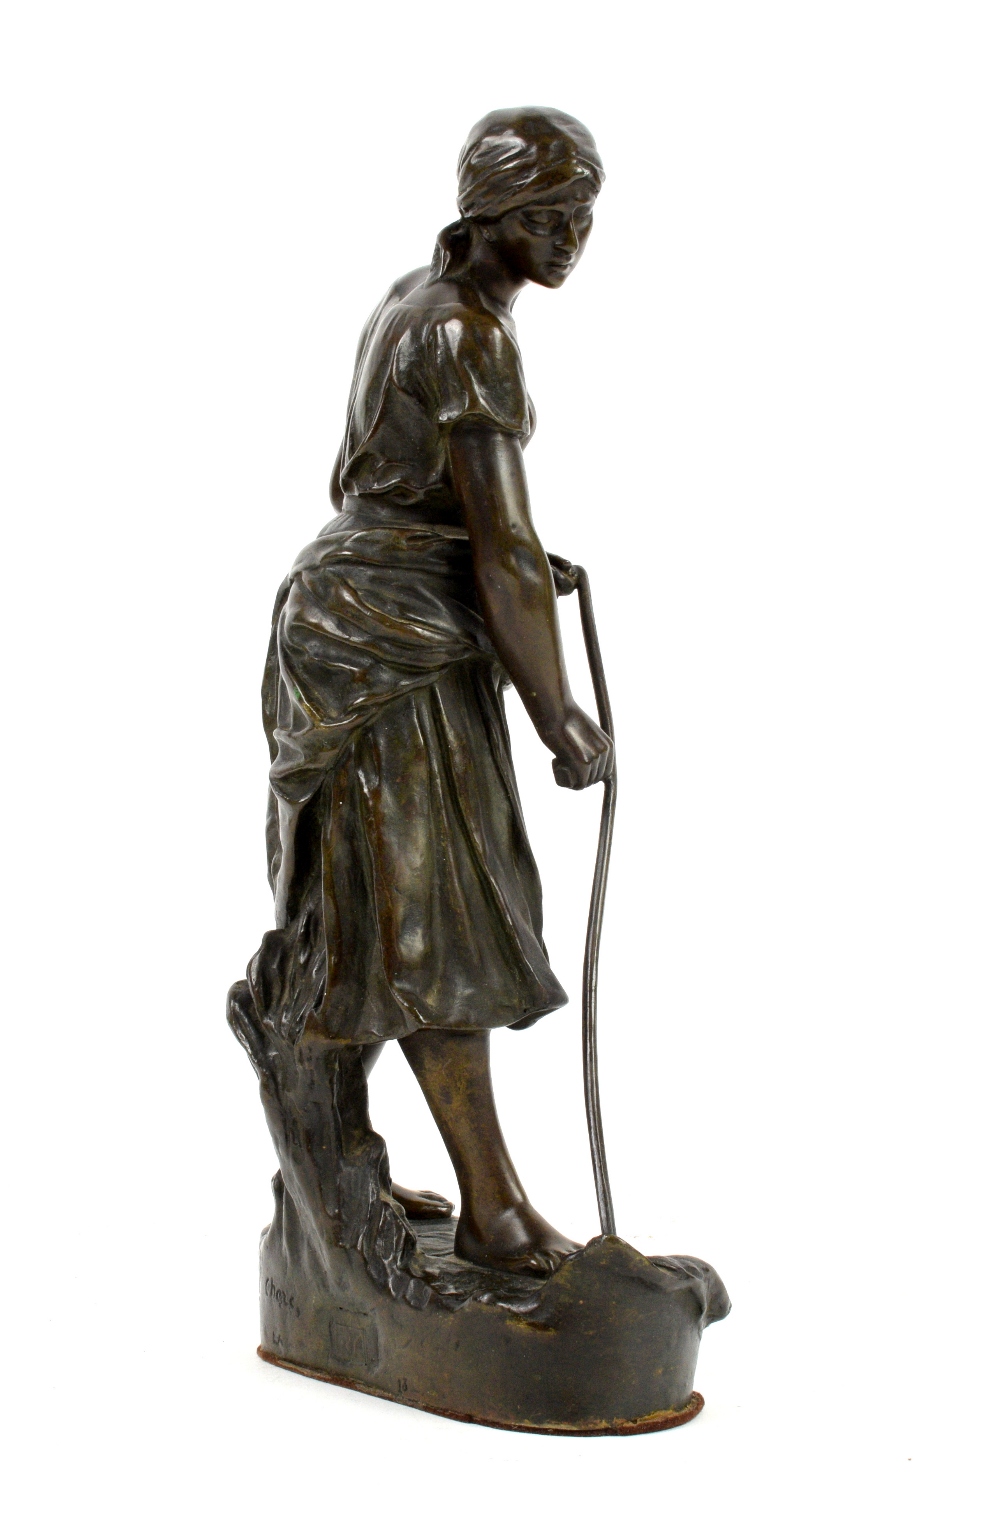 Cheze 19th century French bronze figure of a women working the land various foundry marks to base - Image 6 of 7